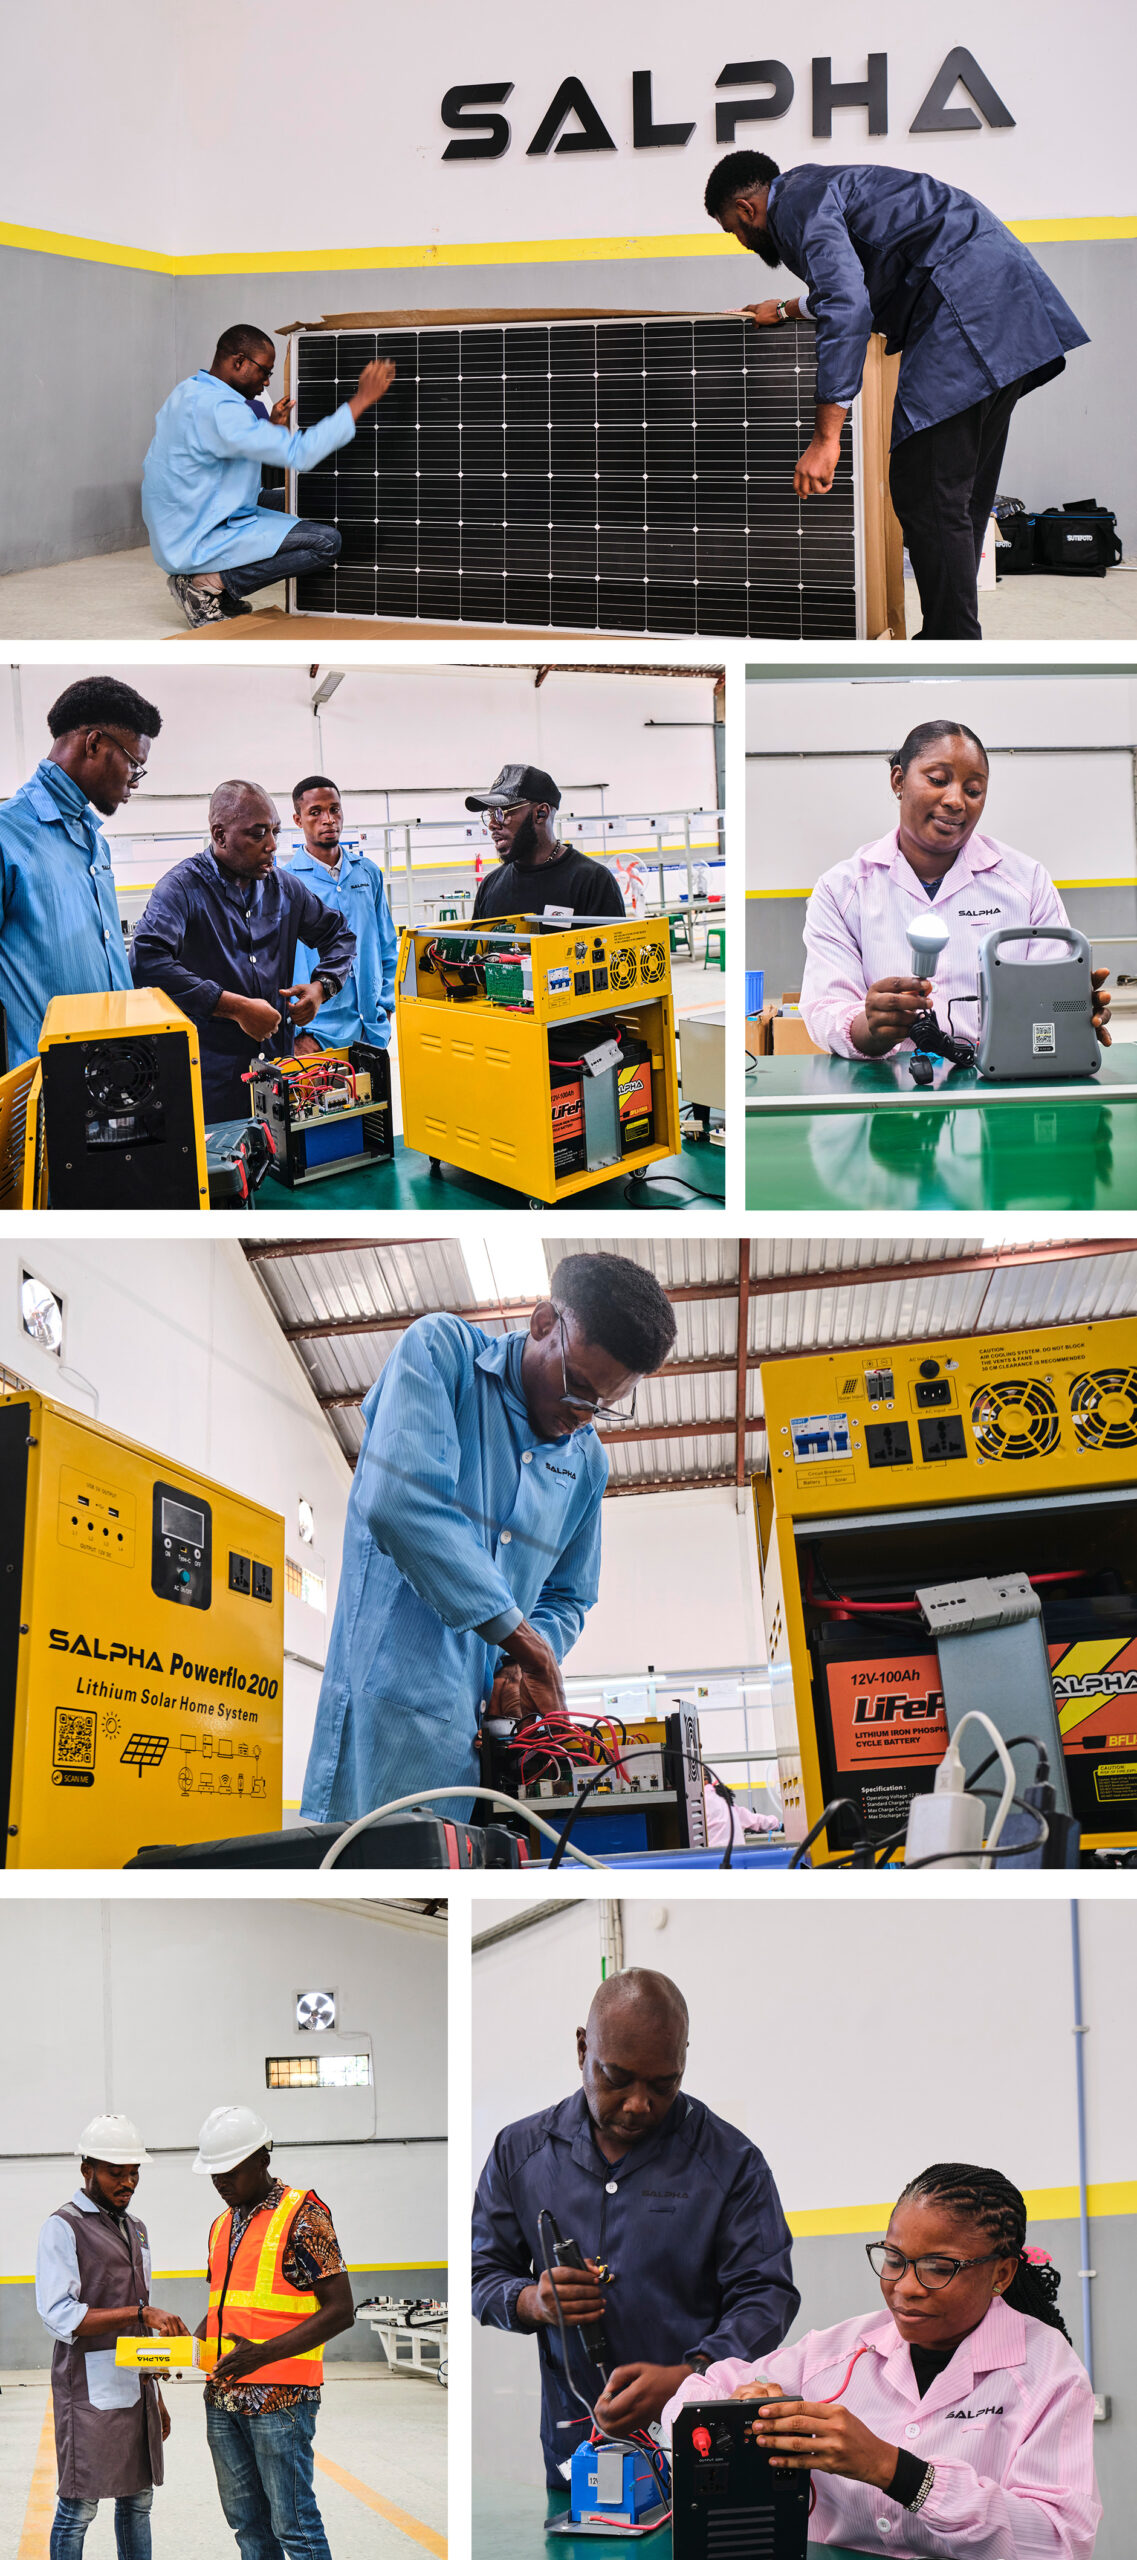 Collection of photos of the 2024 Ashden Award winner Salpha Energy. At the top is two workers opening a solar panel. Below on the left-hand side is a group of males talking about batteries. On the right-hand side is a woman testing a battery. Below is a man working on a solar battery. Below on the left-hand side are two men looking at a solar battery. On the right-hand side is a woman working on a battery with a man next to her. 